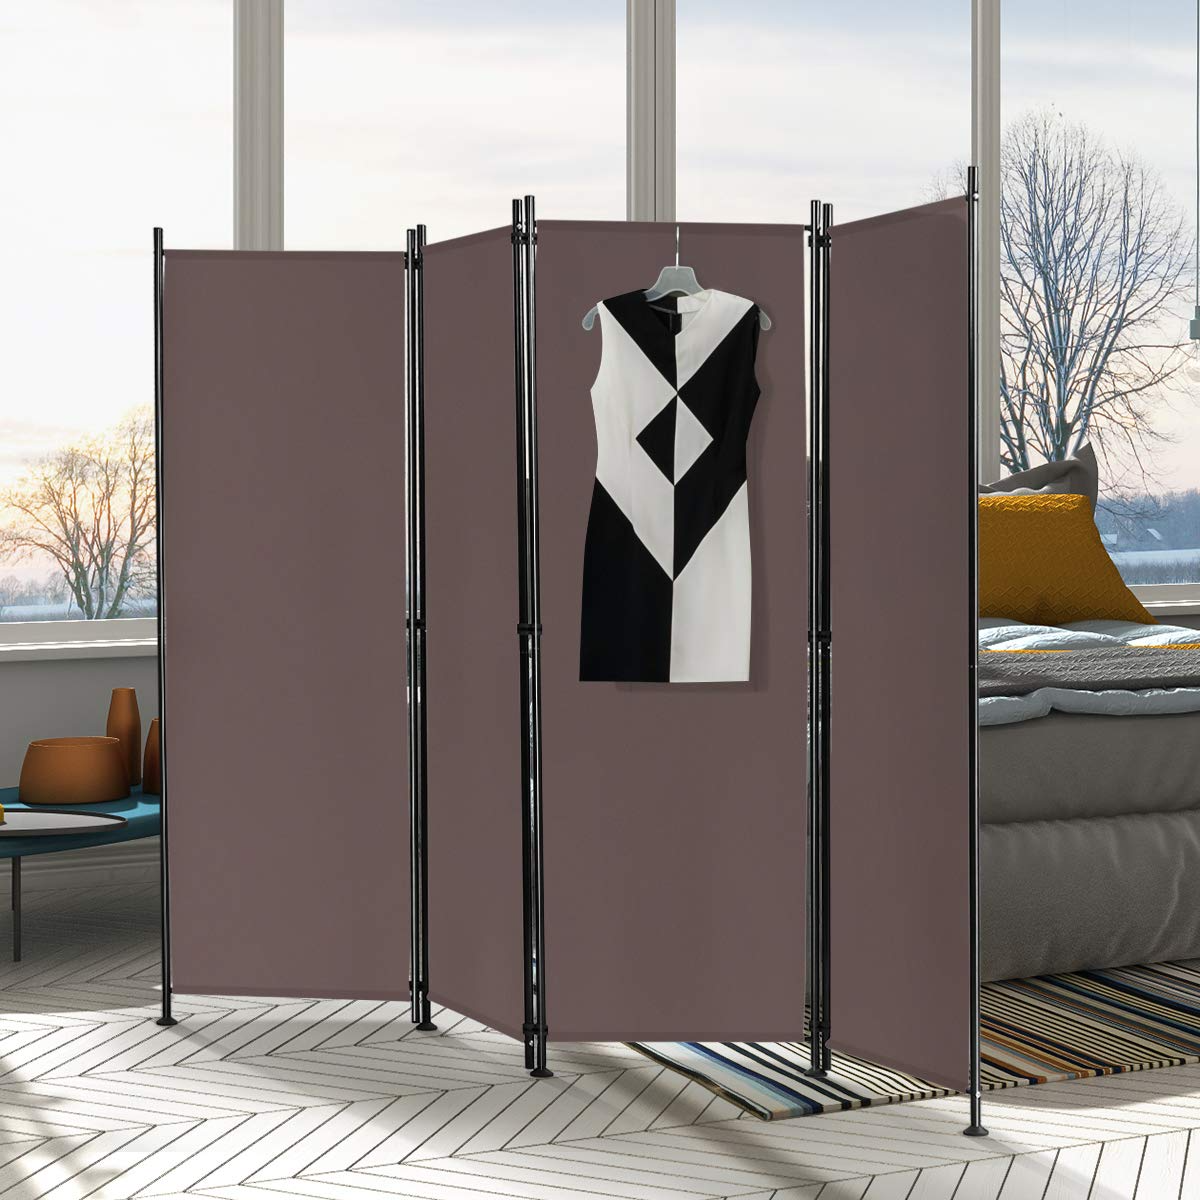 Giantex 4 Panel Room Divider, 5.6 Ft Folding Privacy Screen with Adjustable Foot Pads (Coffee) - Giantexus